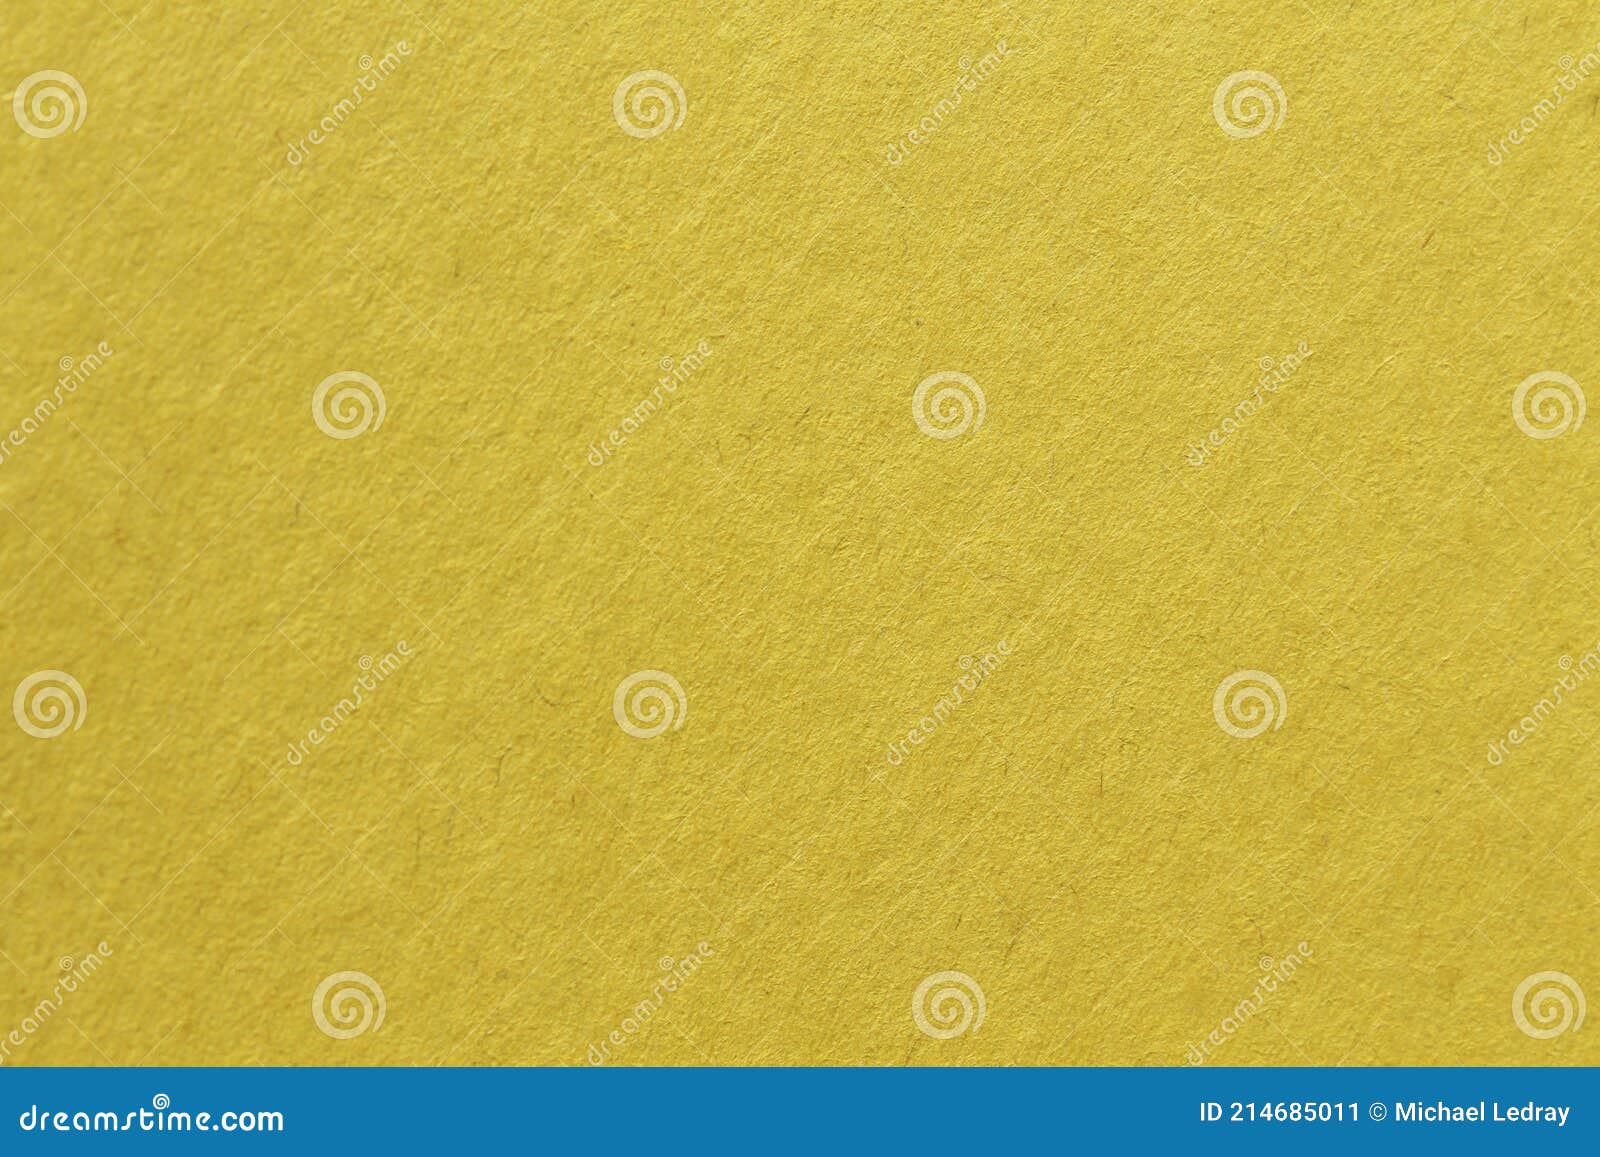 close up aka macro shot of yellow construction paper, showing texture, paper fibers, flaws, and more. the perfect image for all